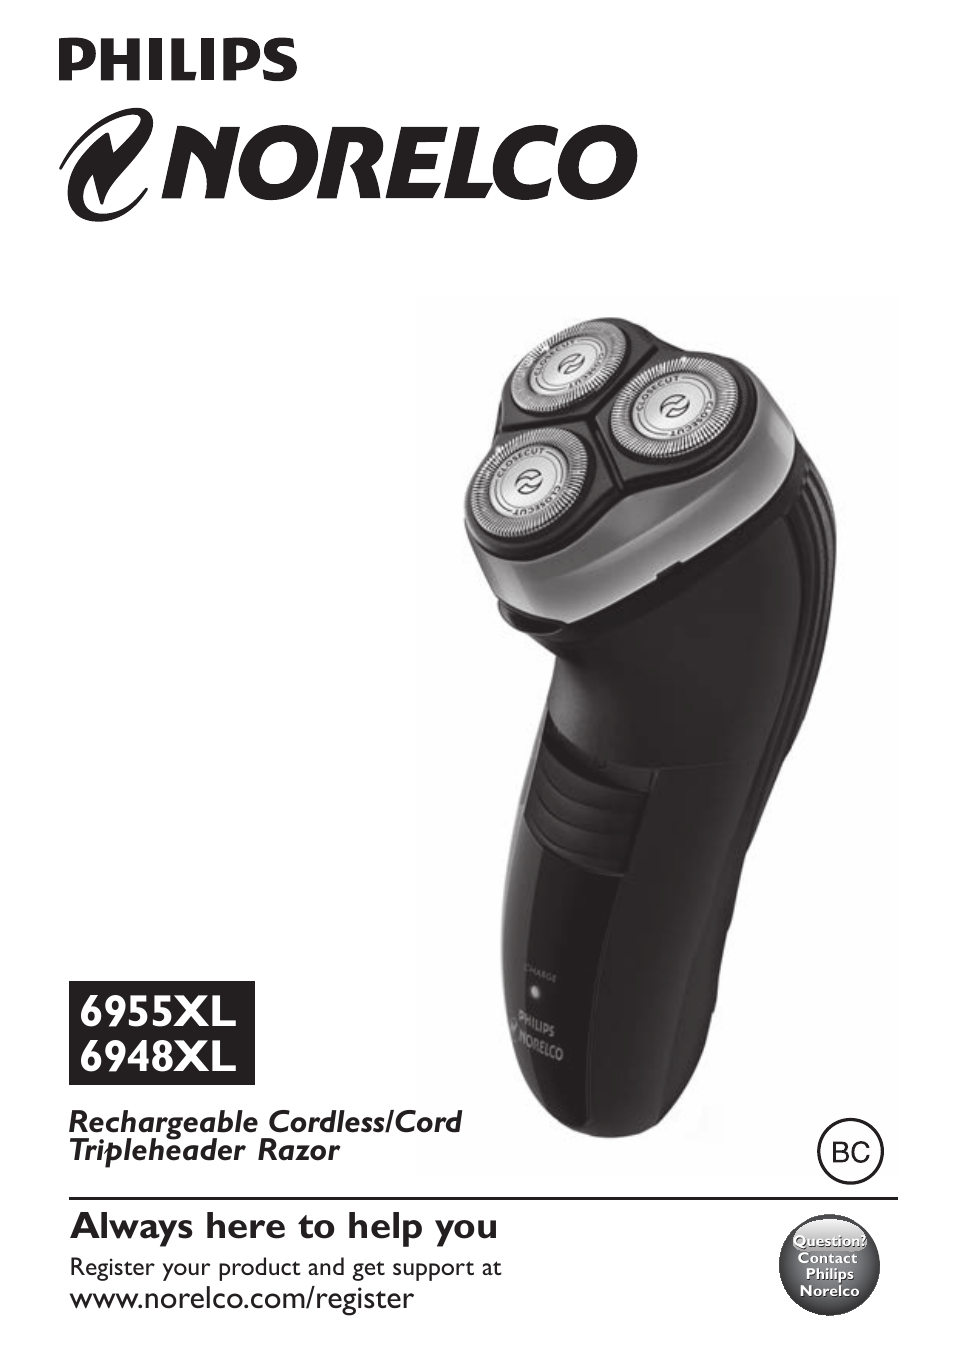 Philips Norelco Shaver 2100 Series 2000 dry electric shaver 6948XL-41  CloseCut heads Flex & Float system 35 min shaving 8 hour charge User Manual  | 11 pages